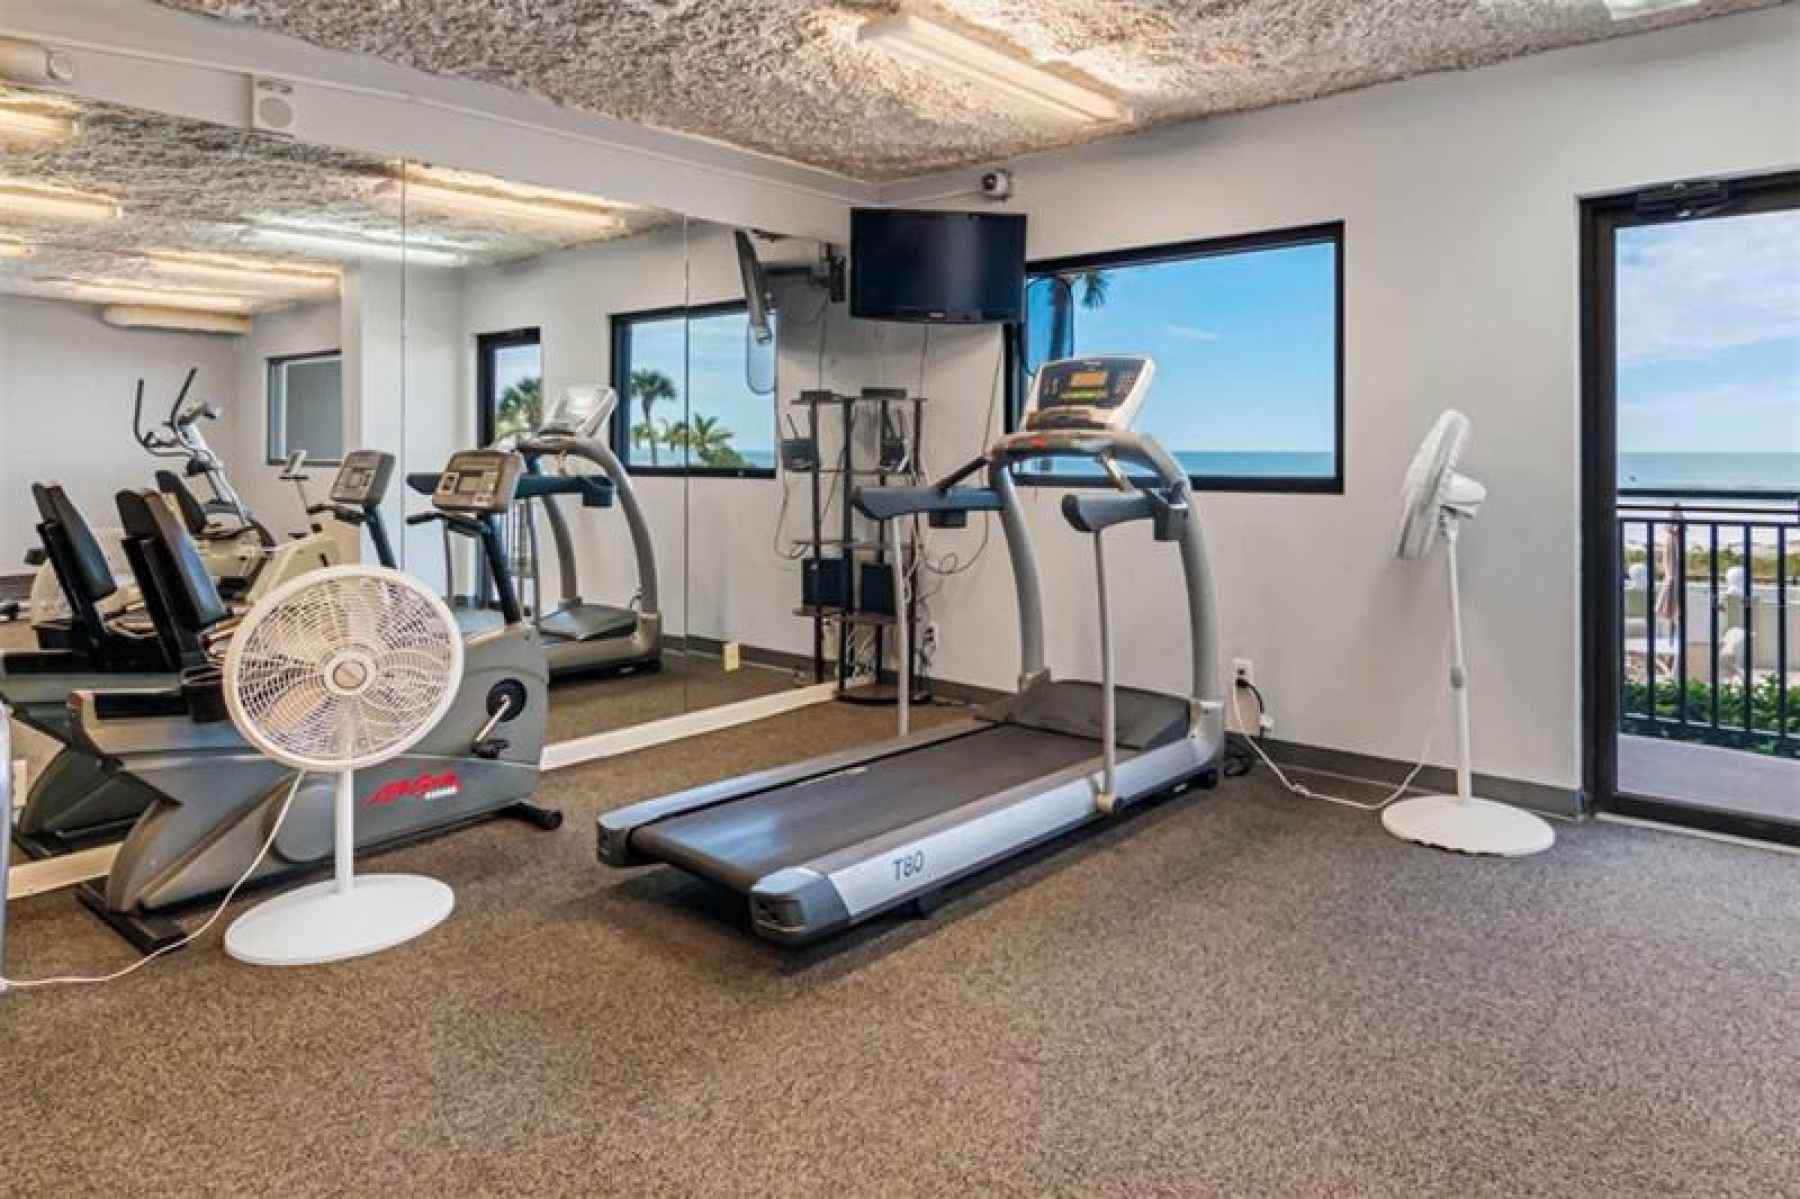 g23A well-stocked fitness room provides opportunity to work out while you enjoy the Gulf view